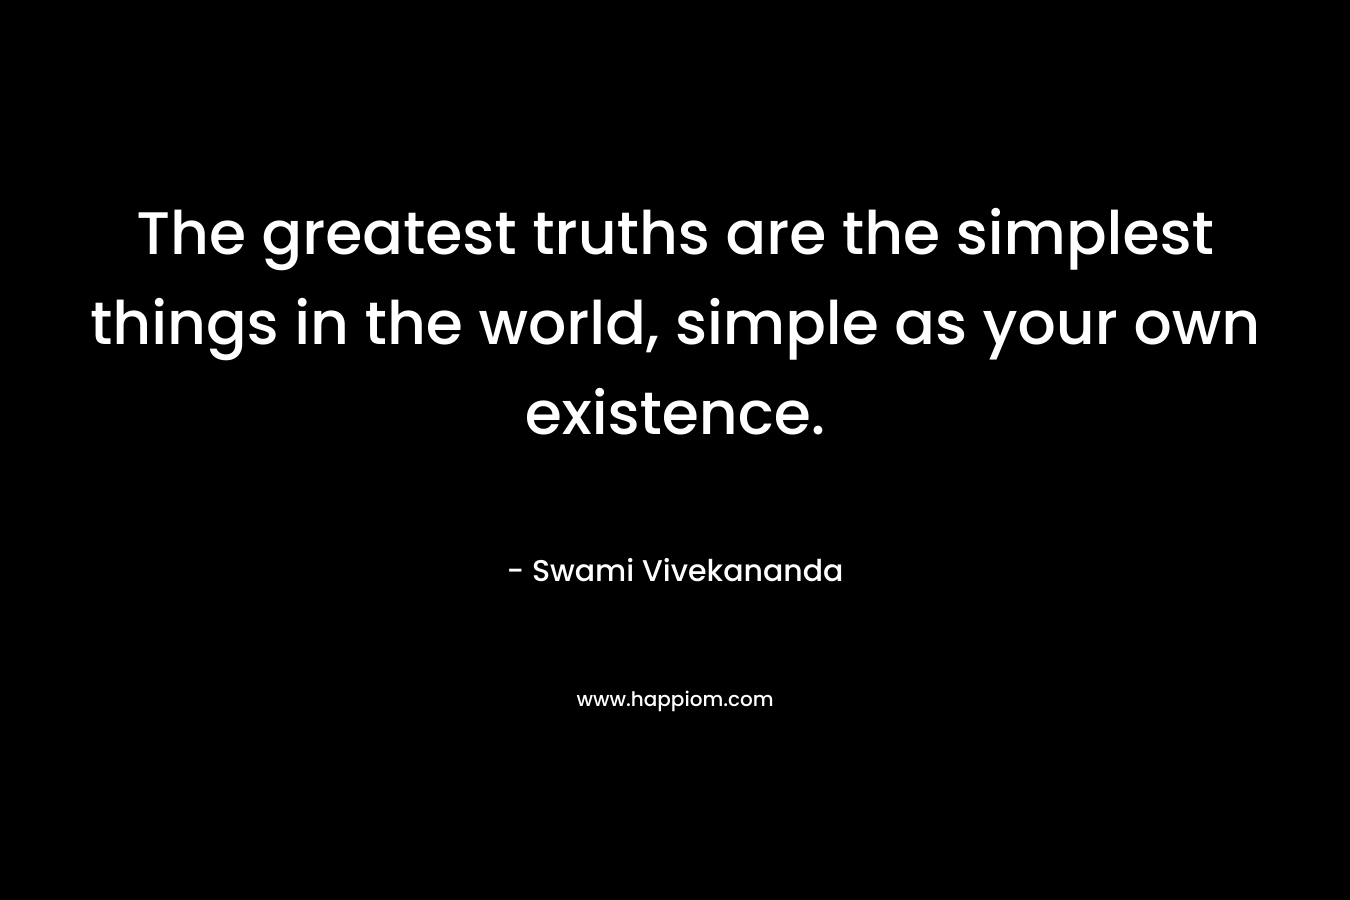 The greatest truths are the simplest things in the world, simple as your own existence. – Swami Vivekananda